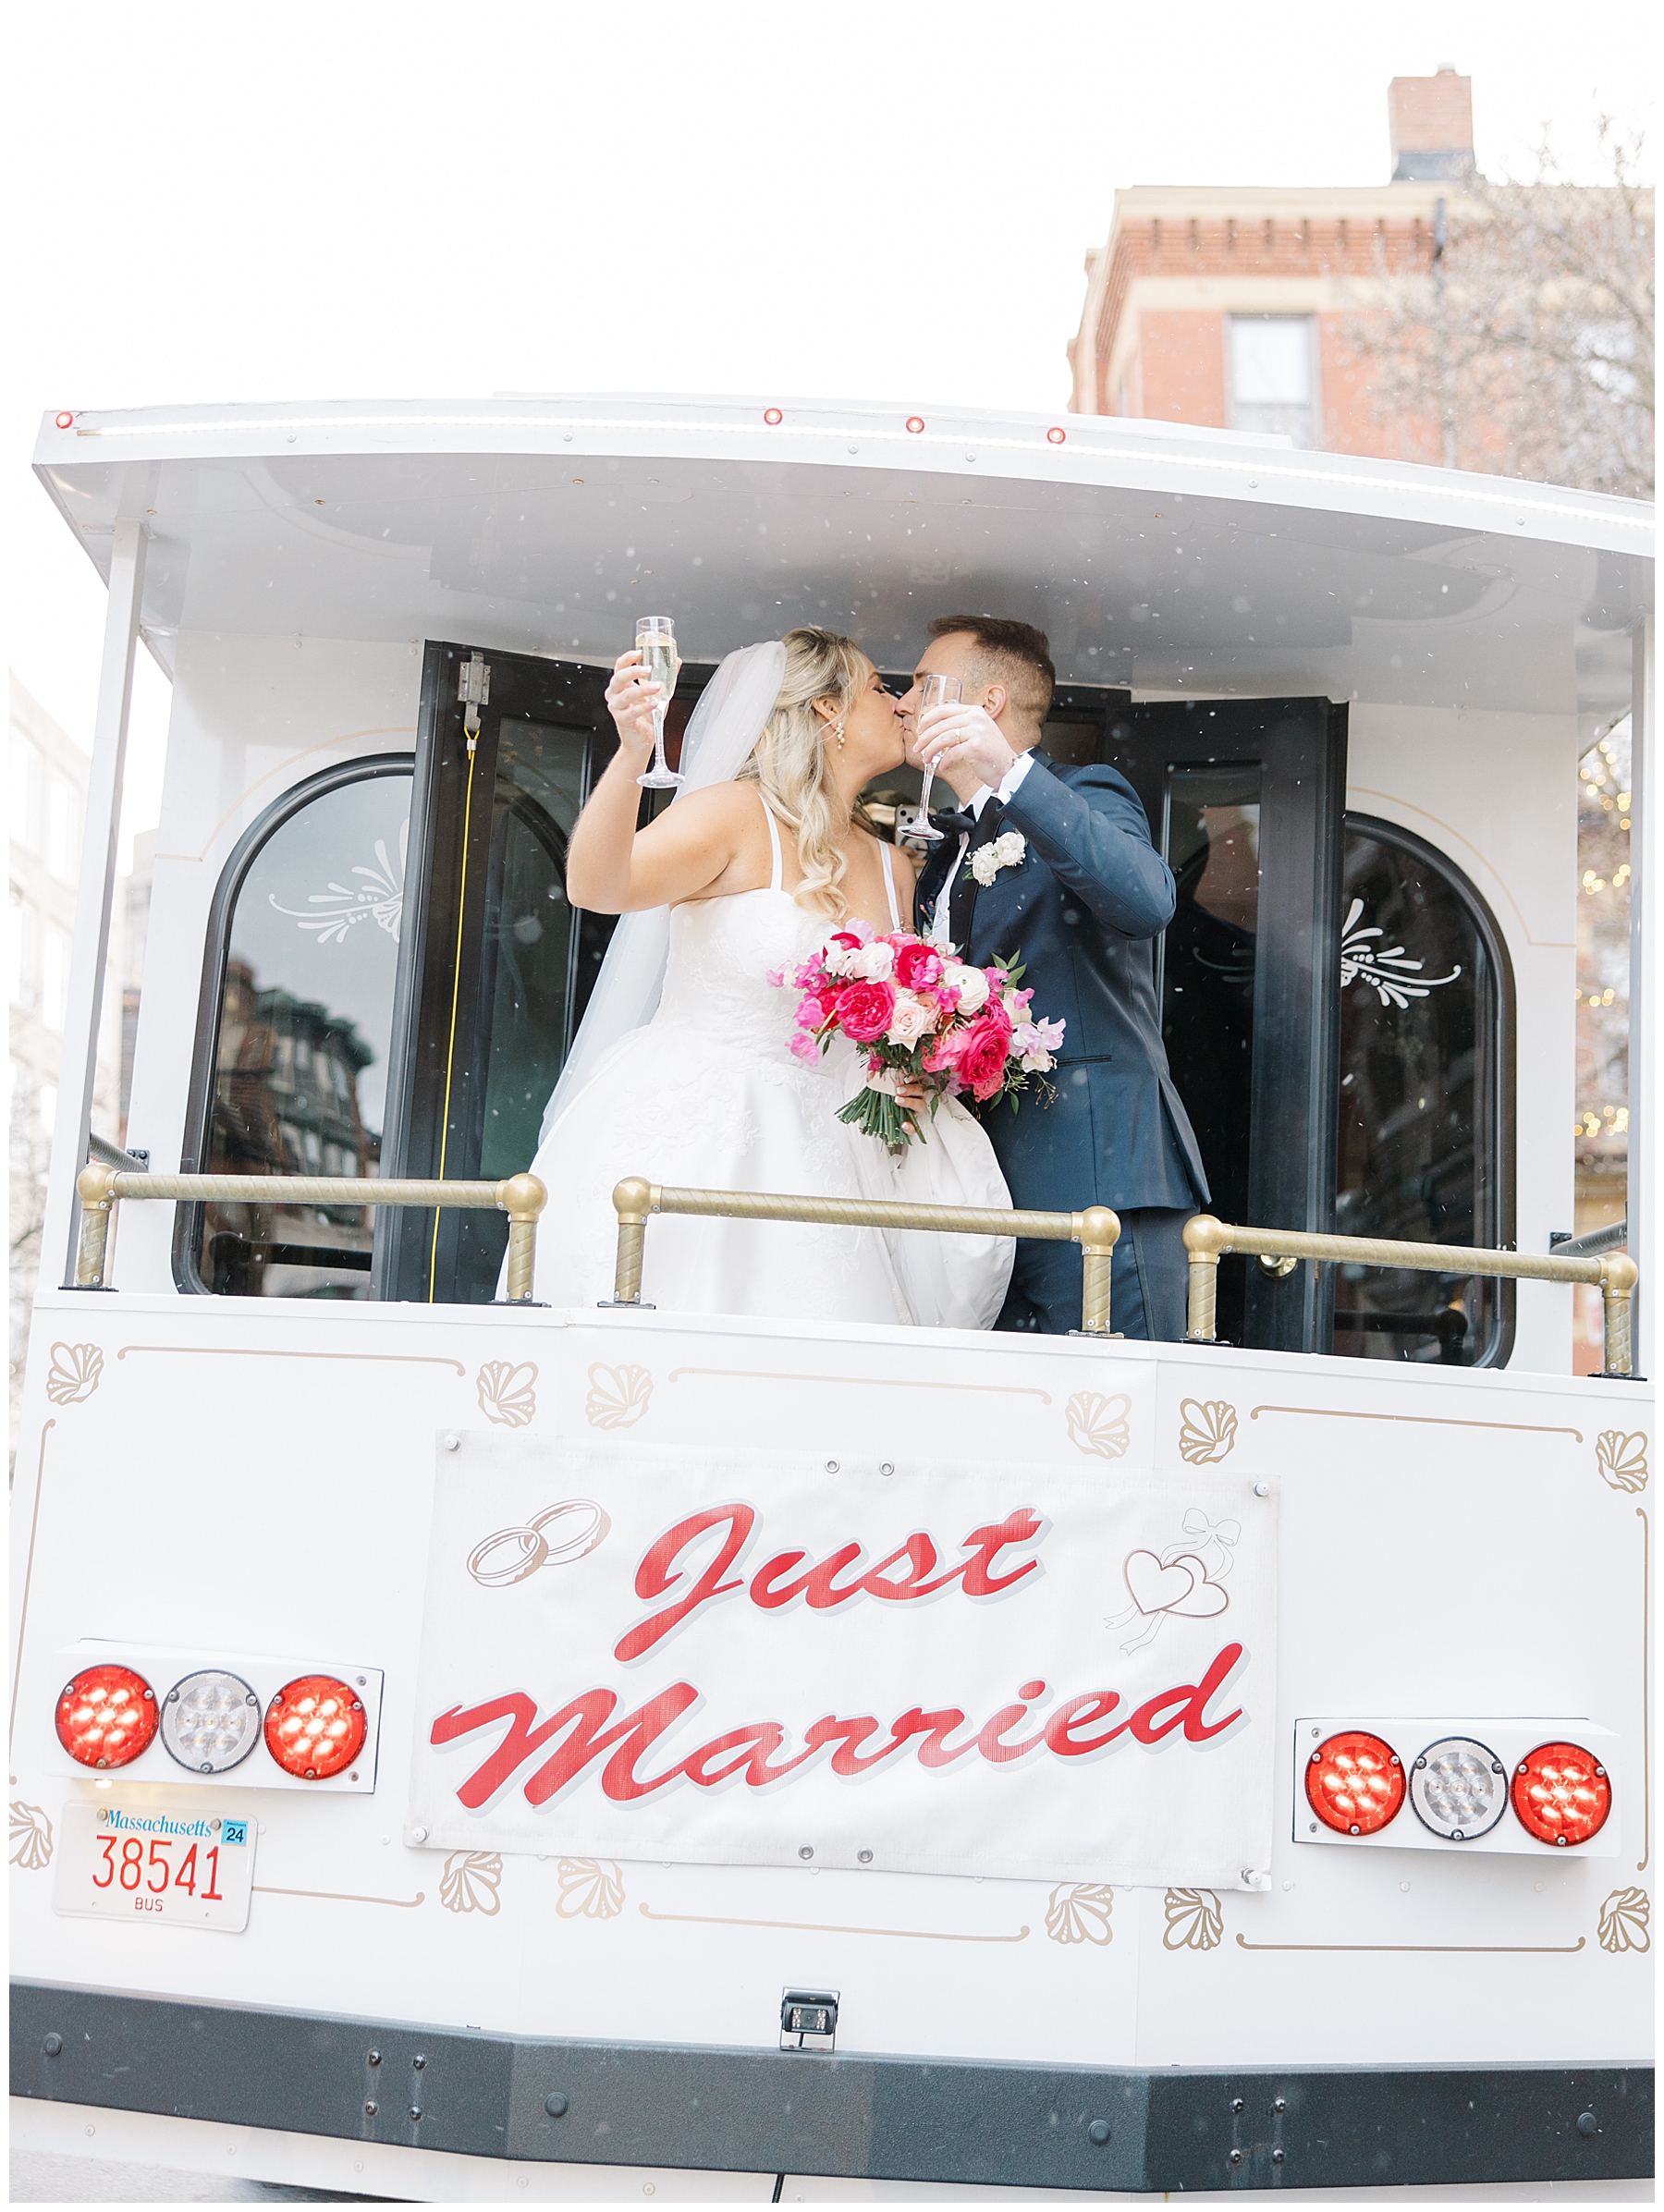 Newlyweds kiss after wedding ceremony on back of trolley